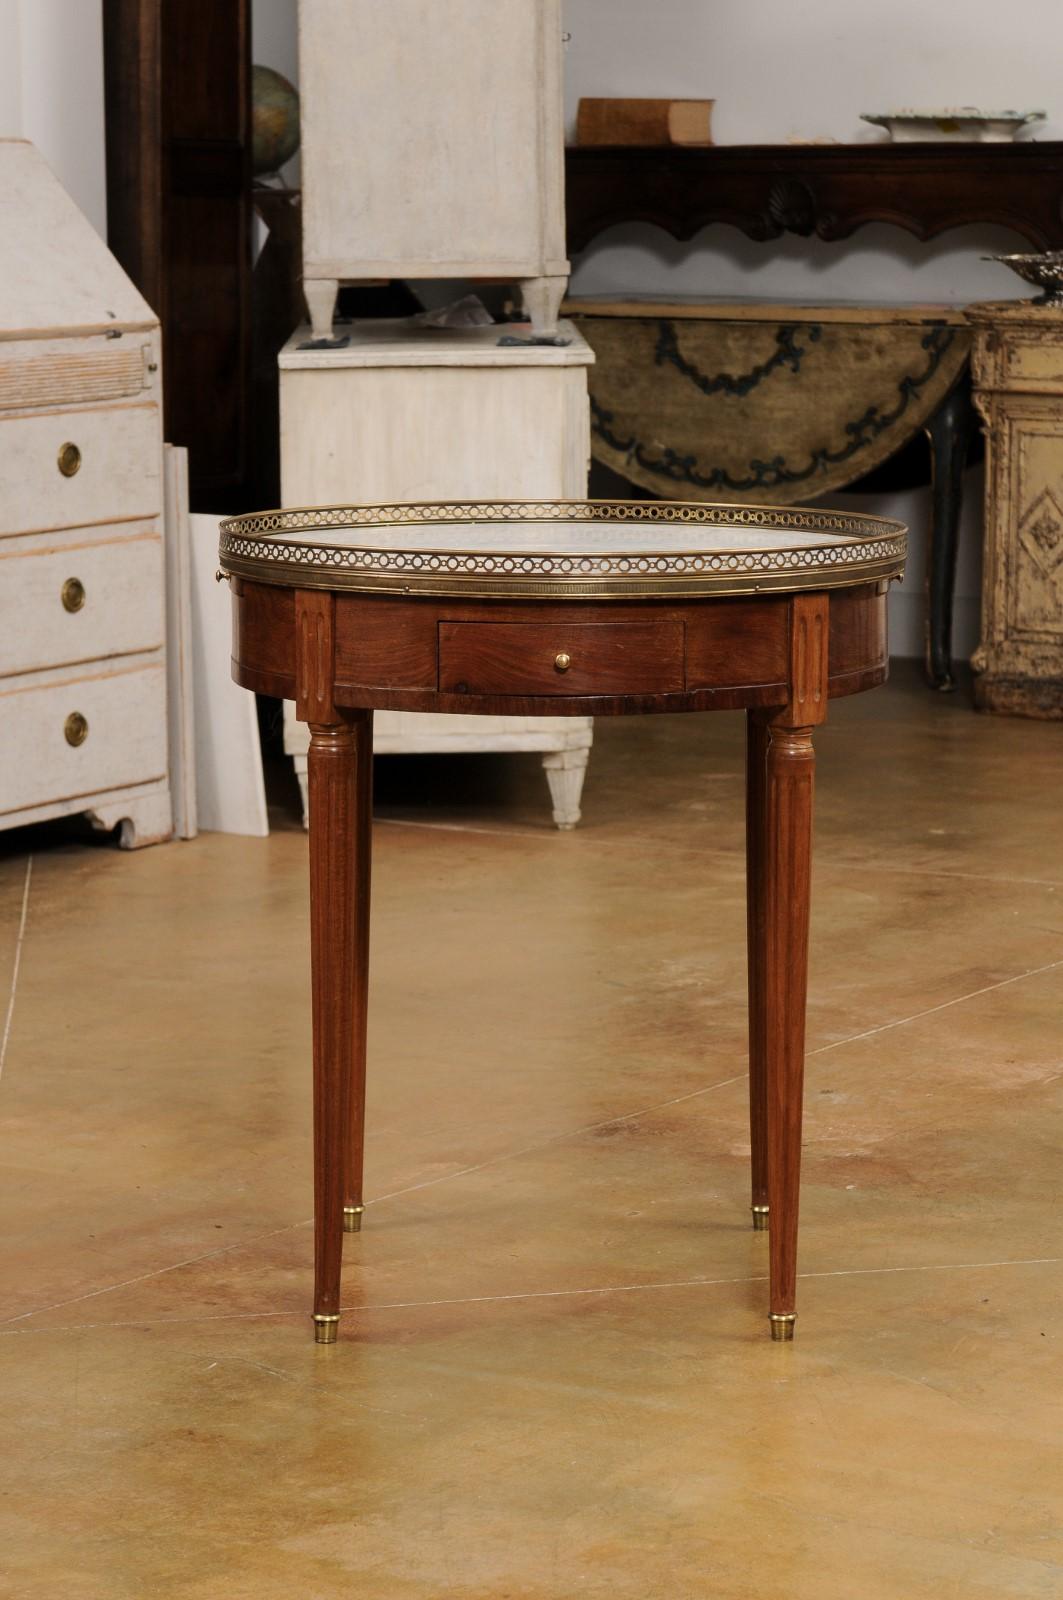 A French Louis XVI style mahogany bouillotte table from the 19th century, with white marble top, pierced brass gallery, drawers, pull-outs and fluted motifs. Created in France during the 19th century, this bouillotte table showcases the stylistic